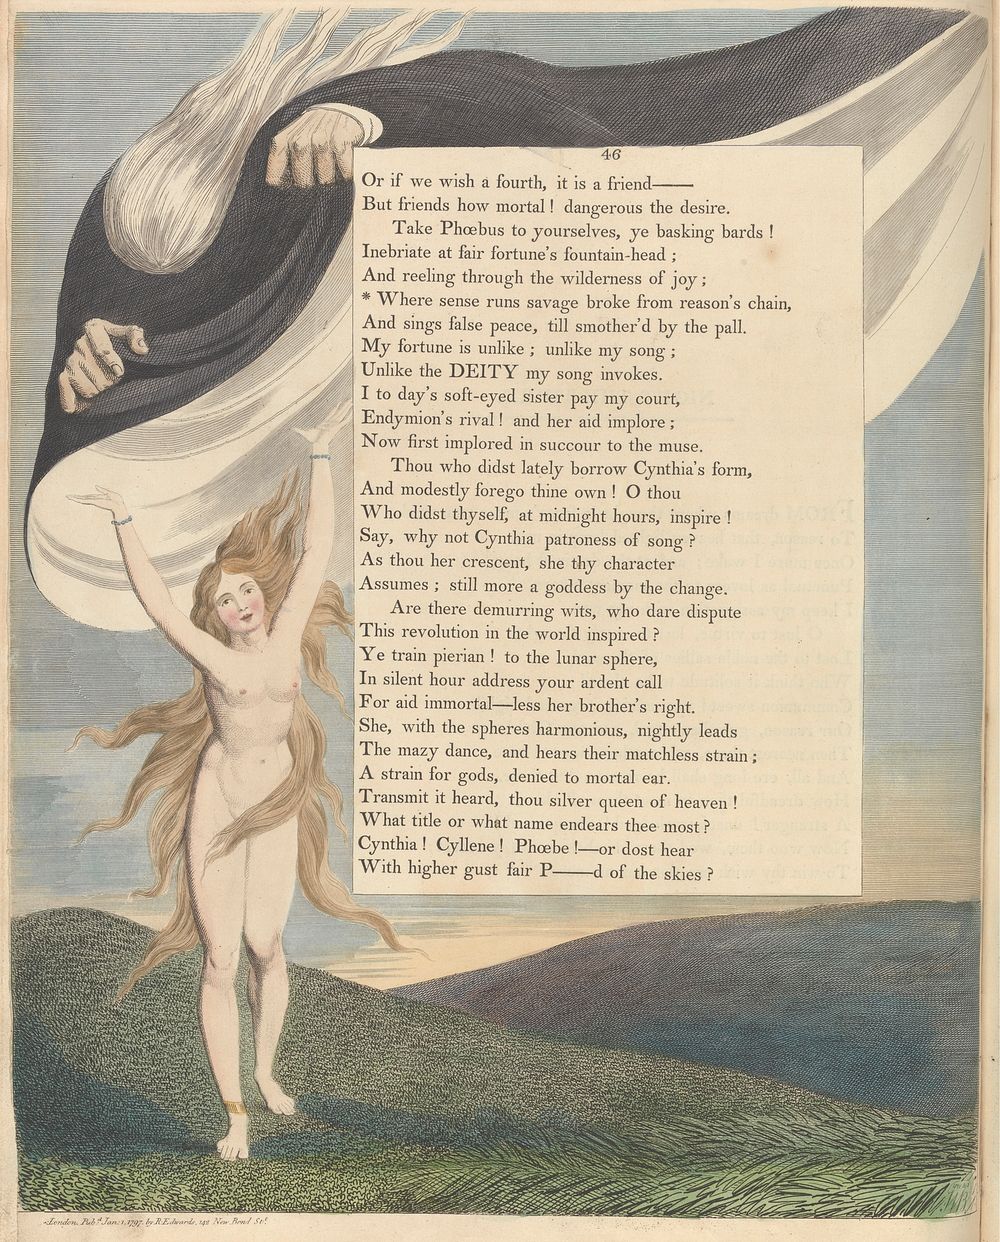 Young's Night Thoughts, Page 46, "Where sense runs savage broke from reason's chain" by William Blake.